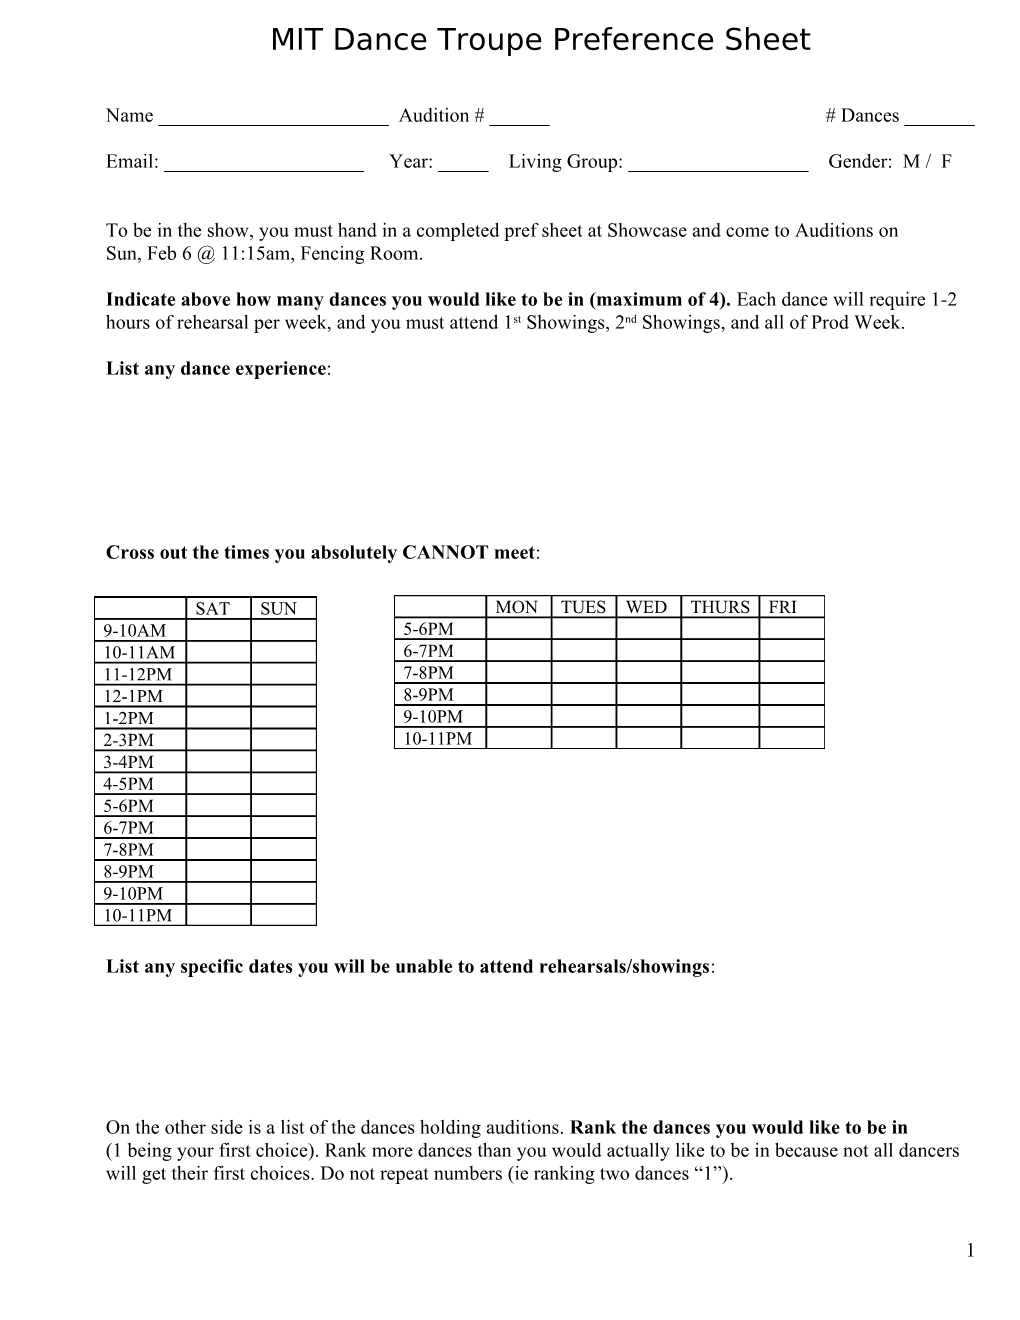 MIT Dance Troupe Preference Sheet s1